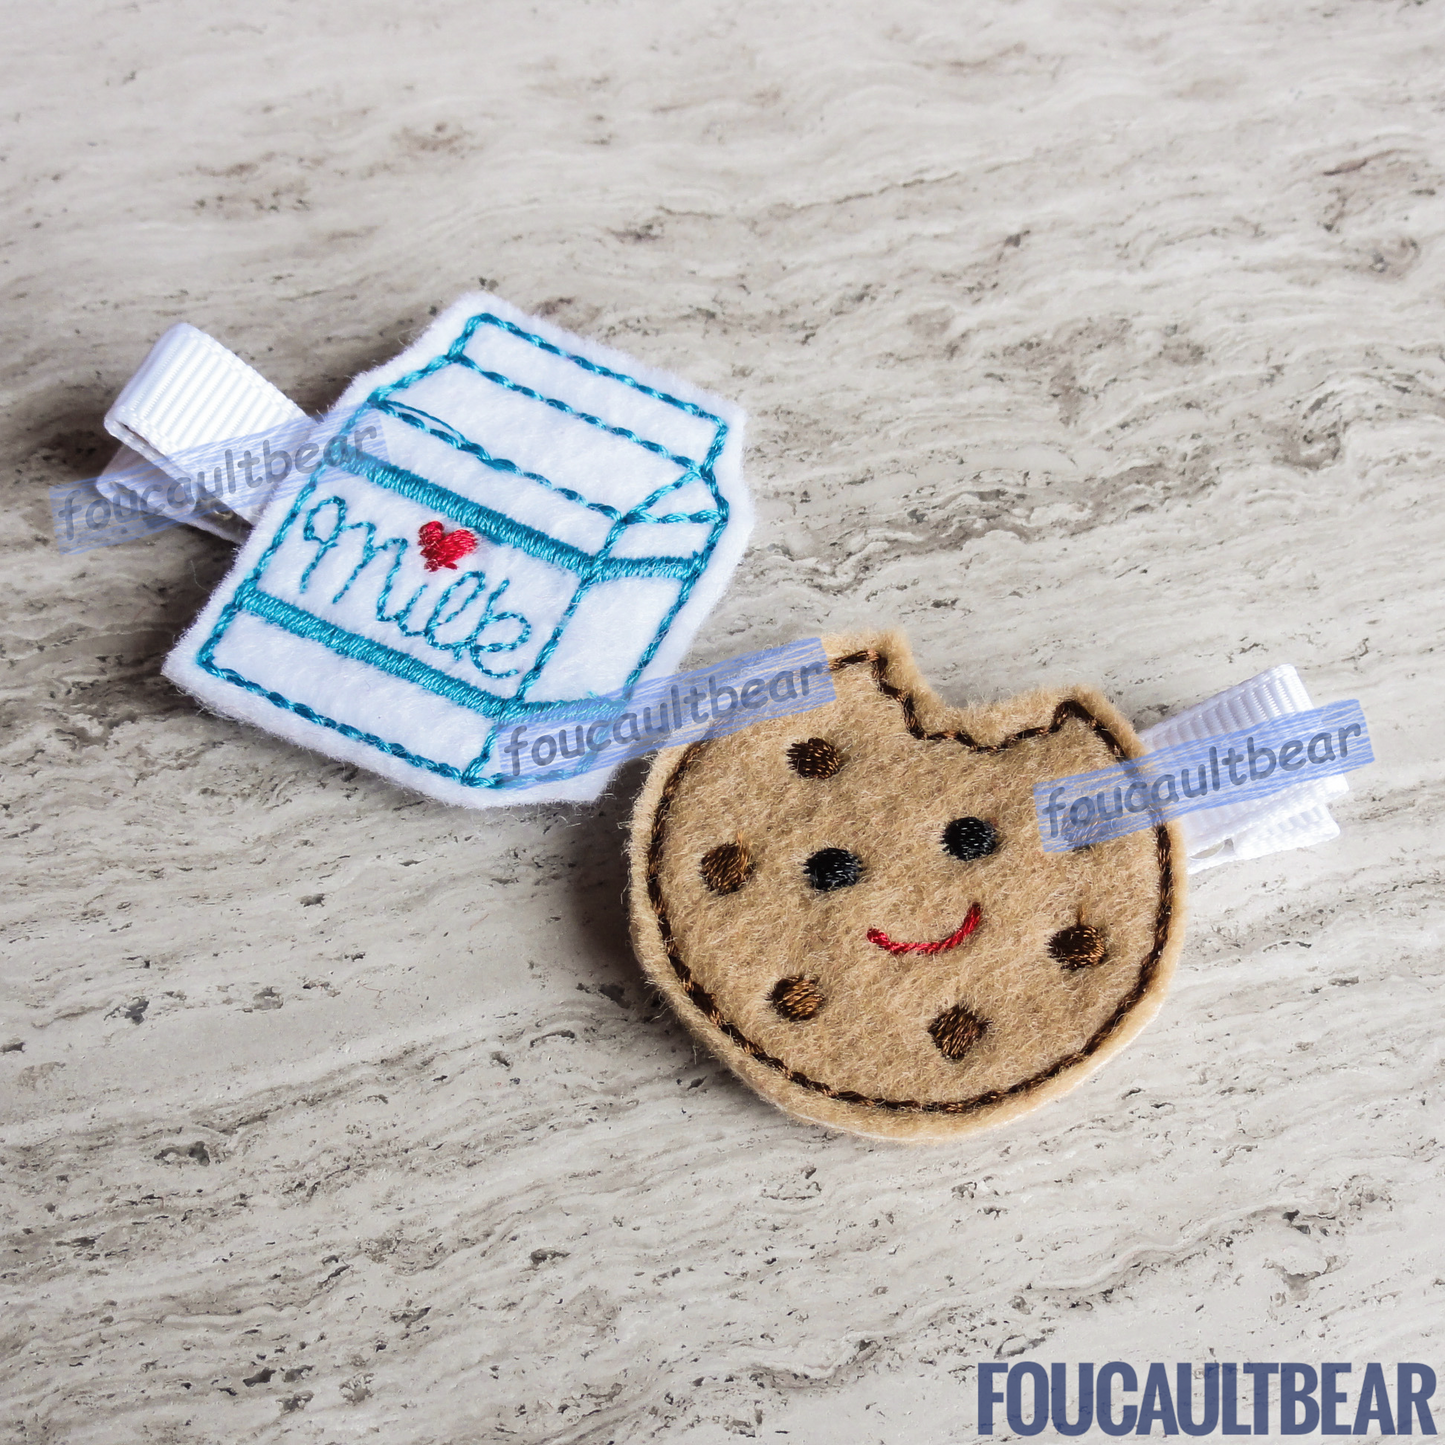 Foucaultbear's HANDMADE HAIR CLIPPIES. Set of Milk & Cookie (Blue Lettering & Cookie Bite). Embroidered Soft Felt Centerpieces. Partially Lined Alligator Hair Clips. This darling Milk & Cookie Hair Clippie Set is perfect for toddlers, preschoolers, kindergartners, grade-schoolers or babies with enough hair to wear them, year-round. Very Versatile, in my opinion. Milk measures approximately 1 3/4 inches (4.5 cm) in height, and Cookie measures approximately 1 1/2 inches (3.8 cm) wide. 